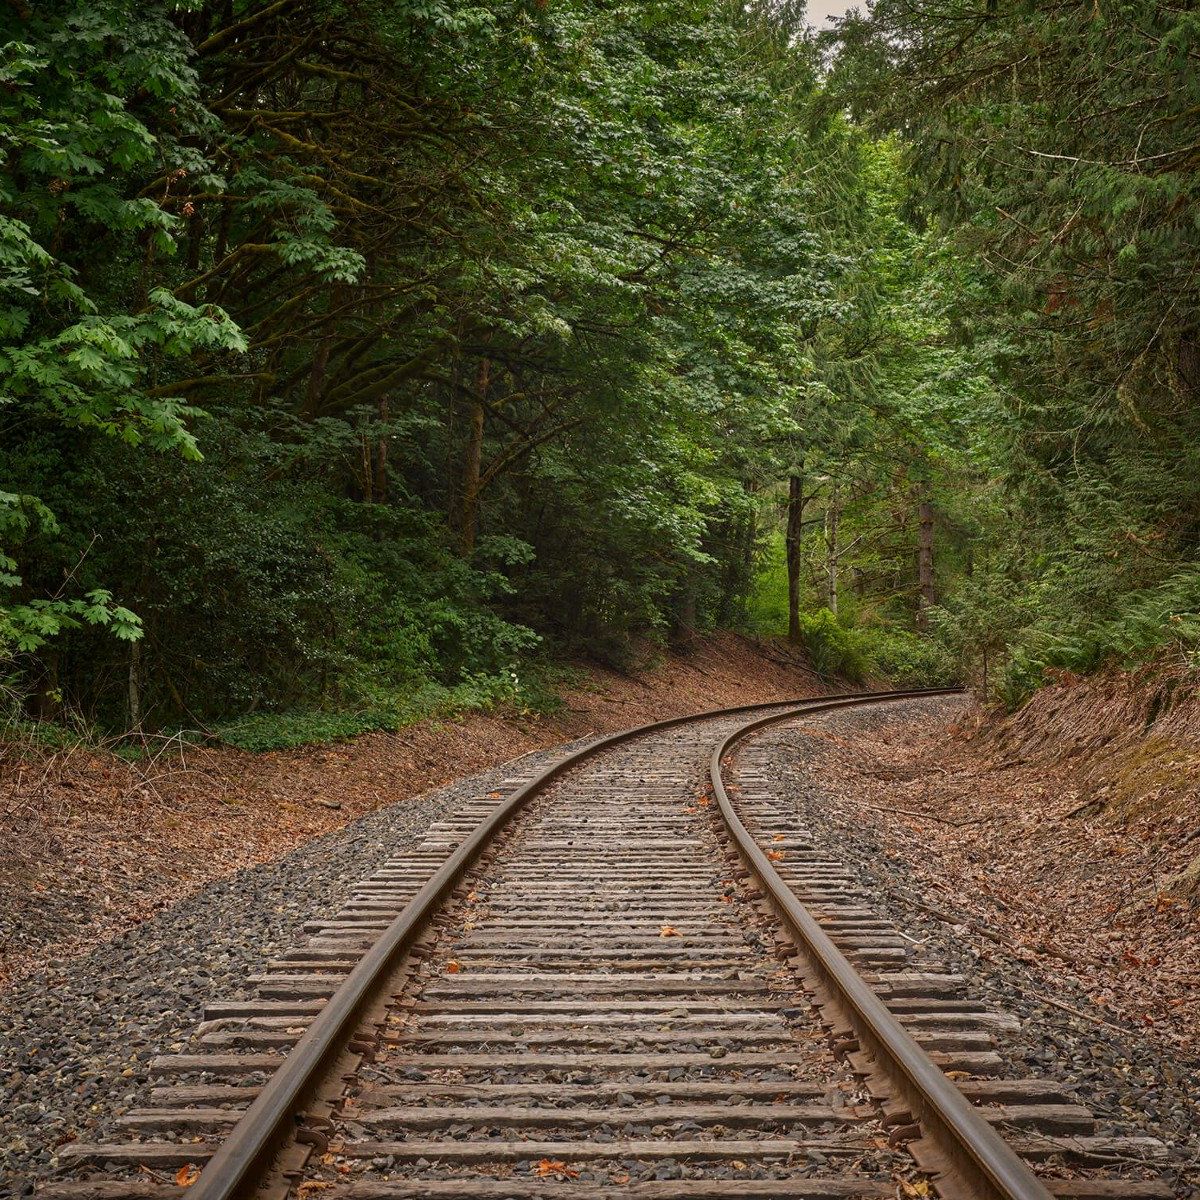 Railway line through the forest